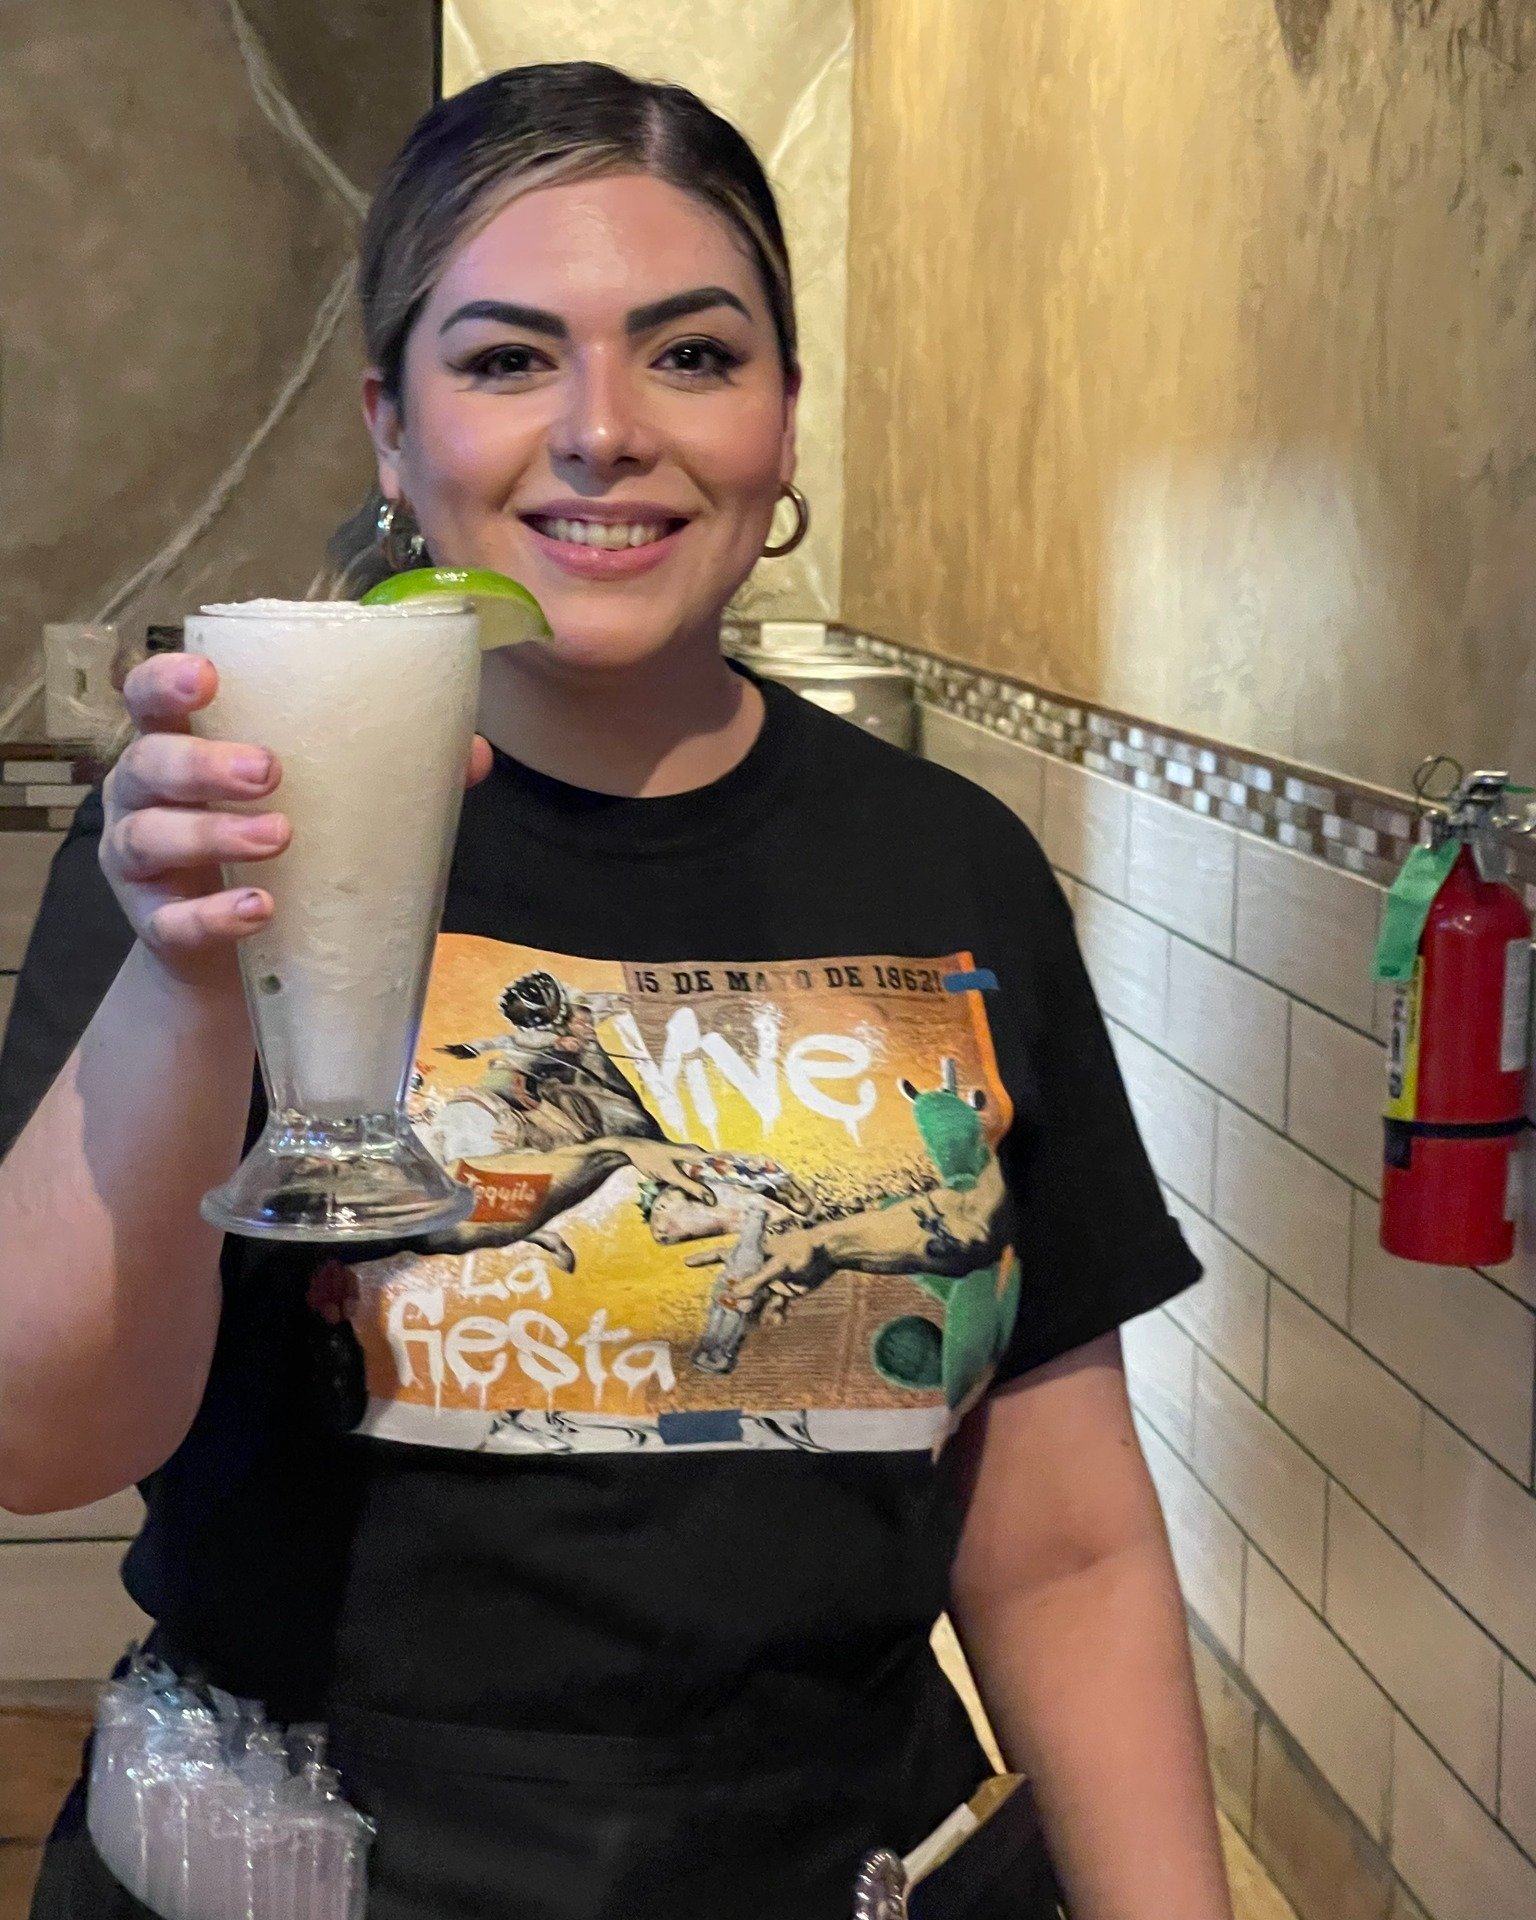 Thank you to all who celebrated Cinco de Mayo with us at San Jose!🇲🇽🌵❤️ We look forward to creating more memorable moments with you in the future!🇲🇽

📍5051 Main Street Shallotte, NC 28470

#shallottenc #cincodemayo #cincodemayofiesta #fiesta #c